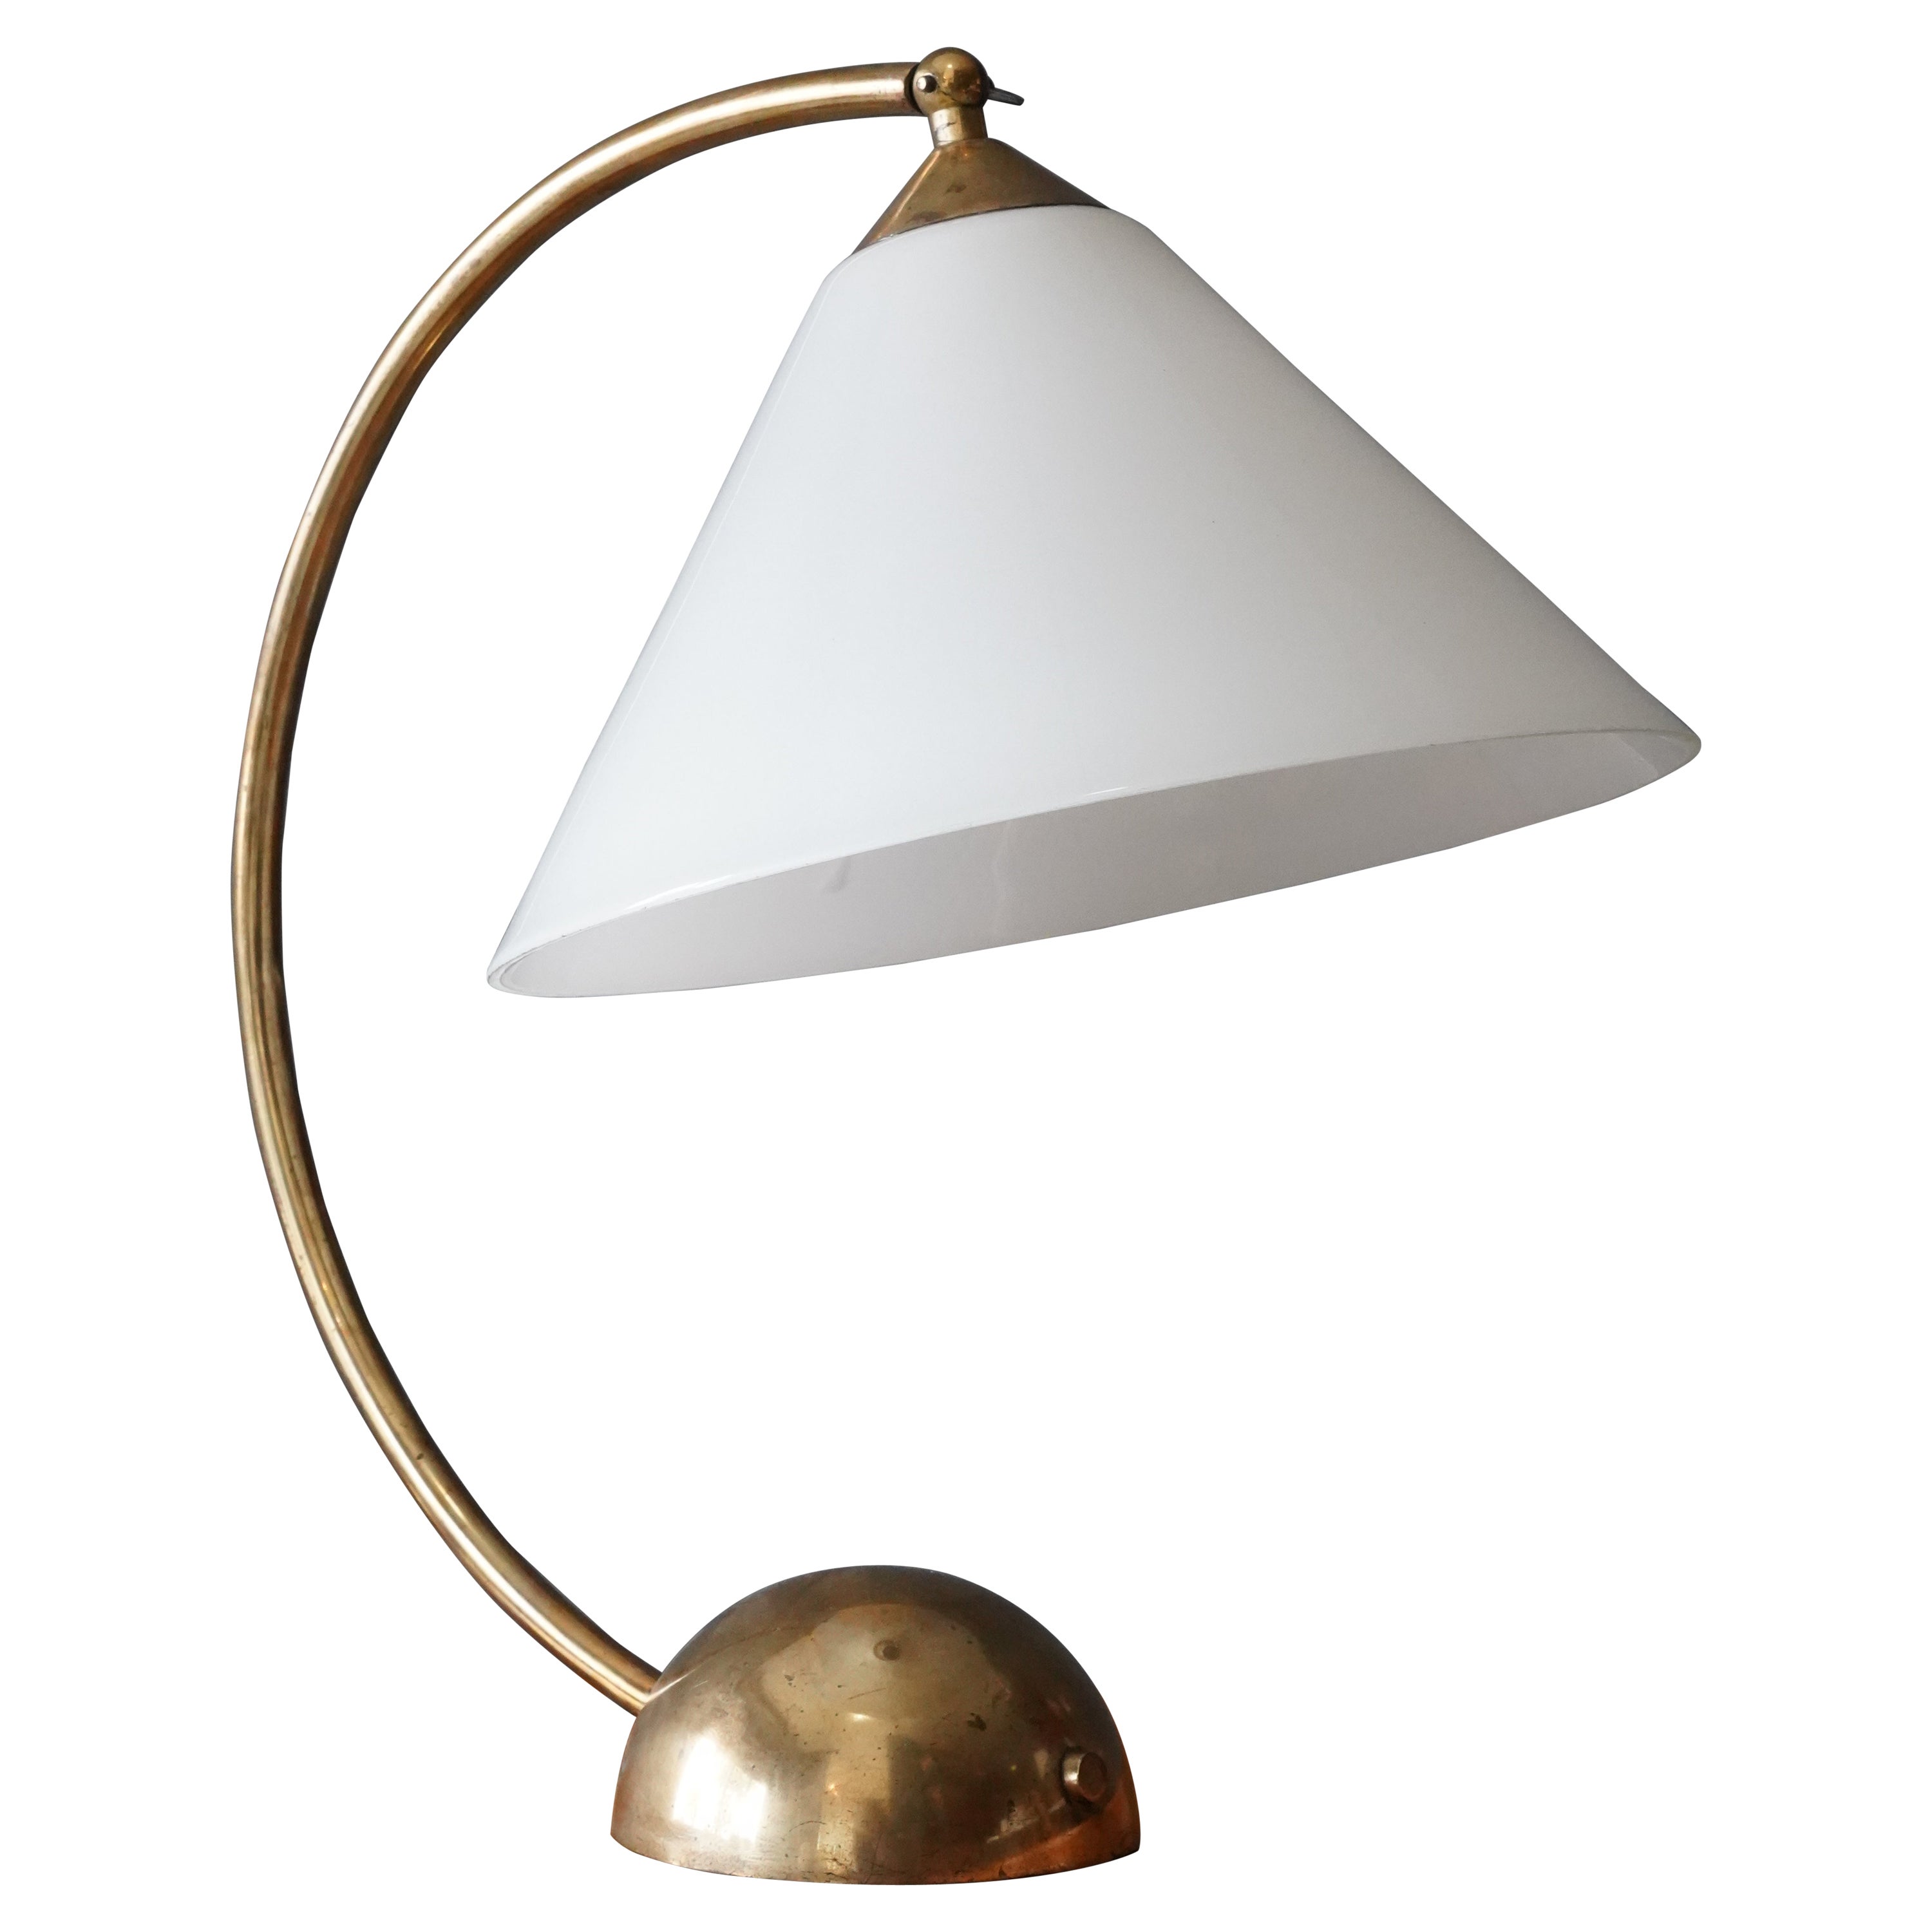 Pitt Müller, Curved Table Lamp, Brass, Milk Glass, Germany, 1950s